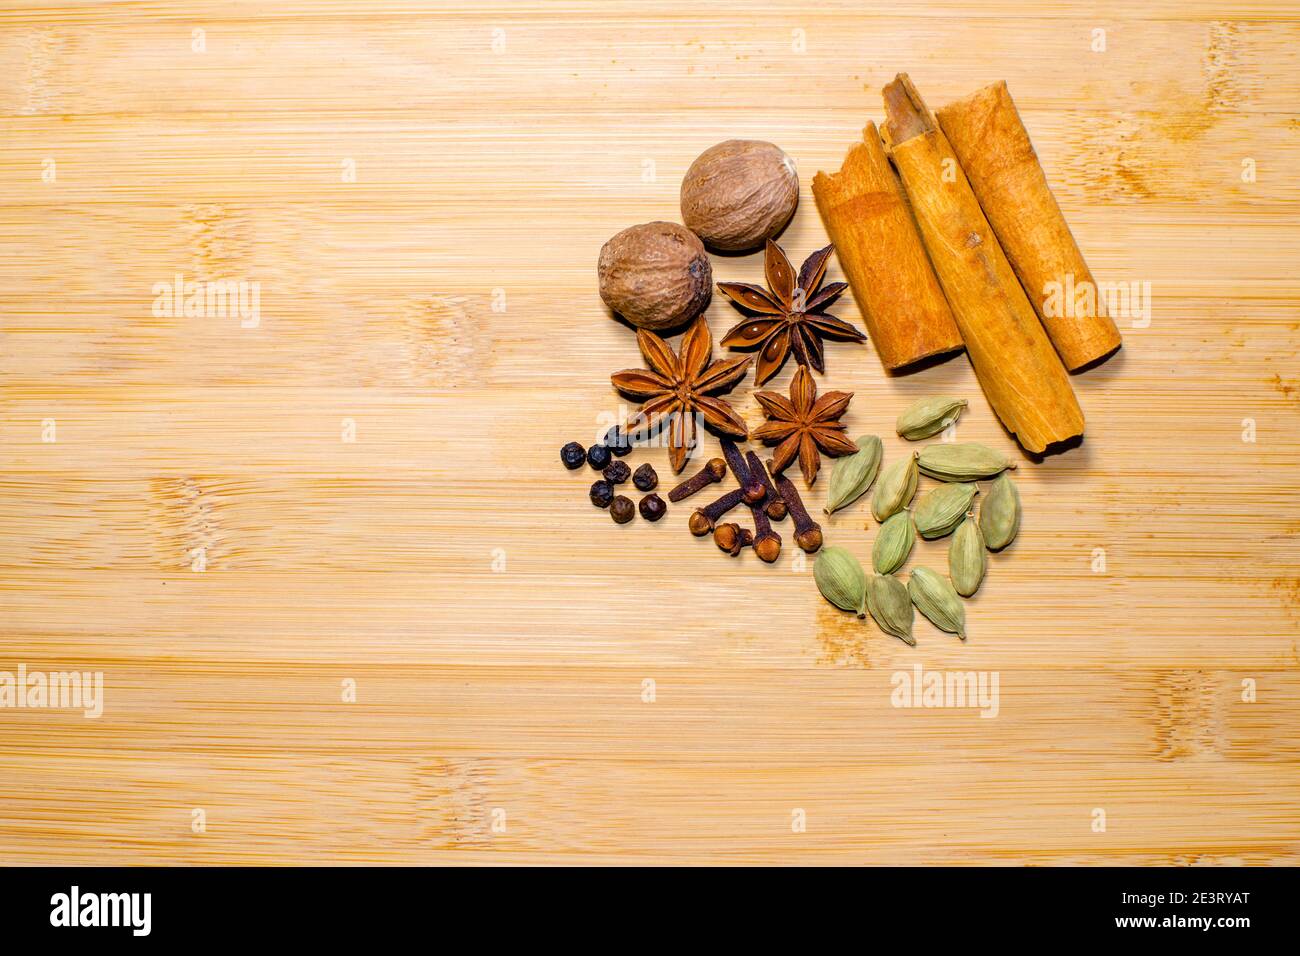 Different spices background which include cinnamon, cardamom, clove, black pepper, Nutmeg, Star anise on the wooden background with copy space. Stock Photo